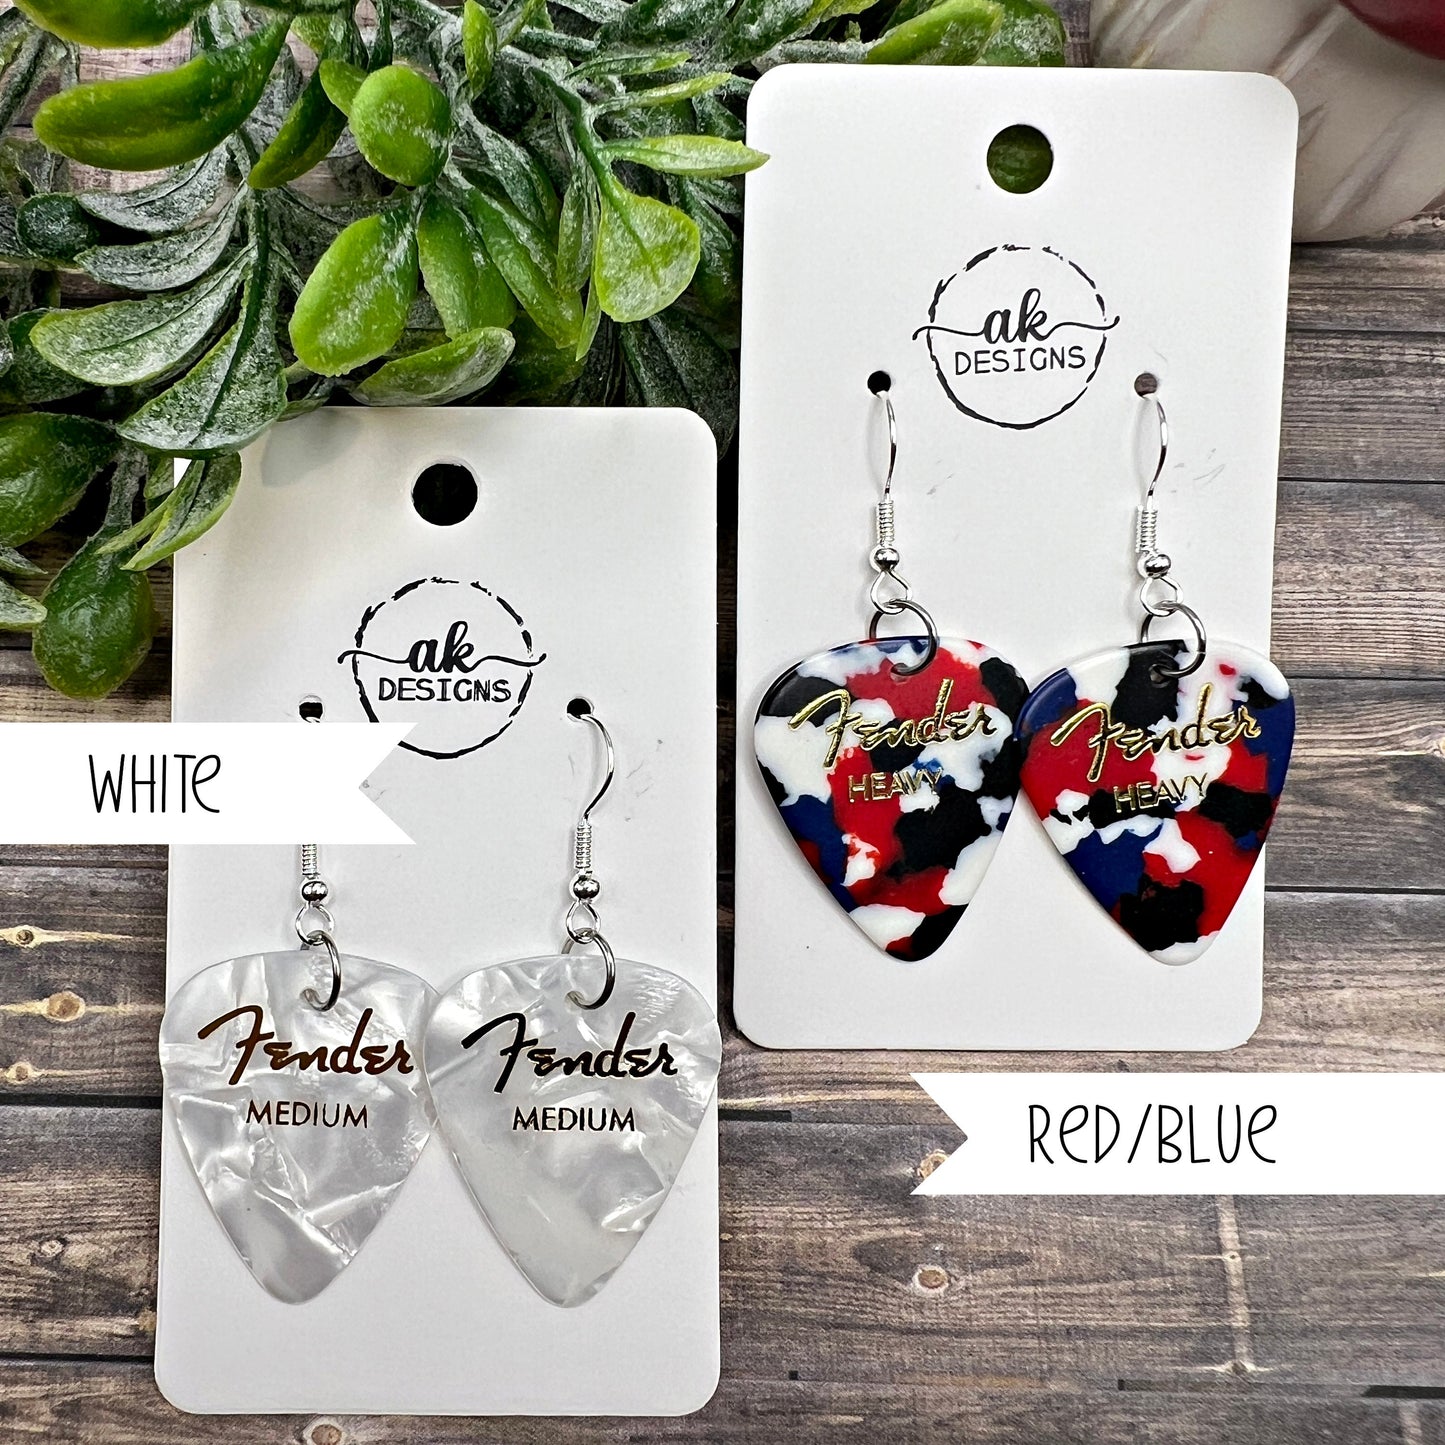 Genuine Fender Authentic Guitar Pick Music Earrings, Hypoallergenic, Choice of Colors, Stainless Steel, Titanium, Sterling Silver